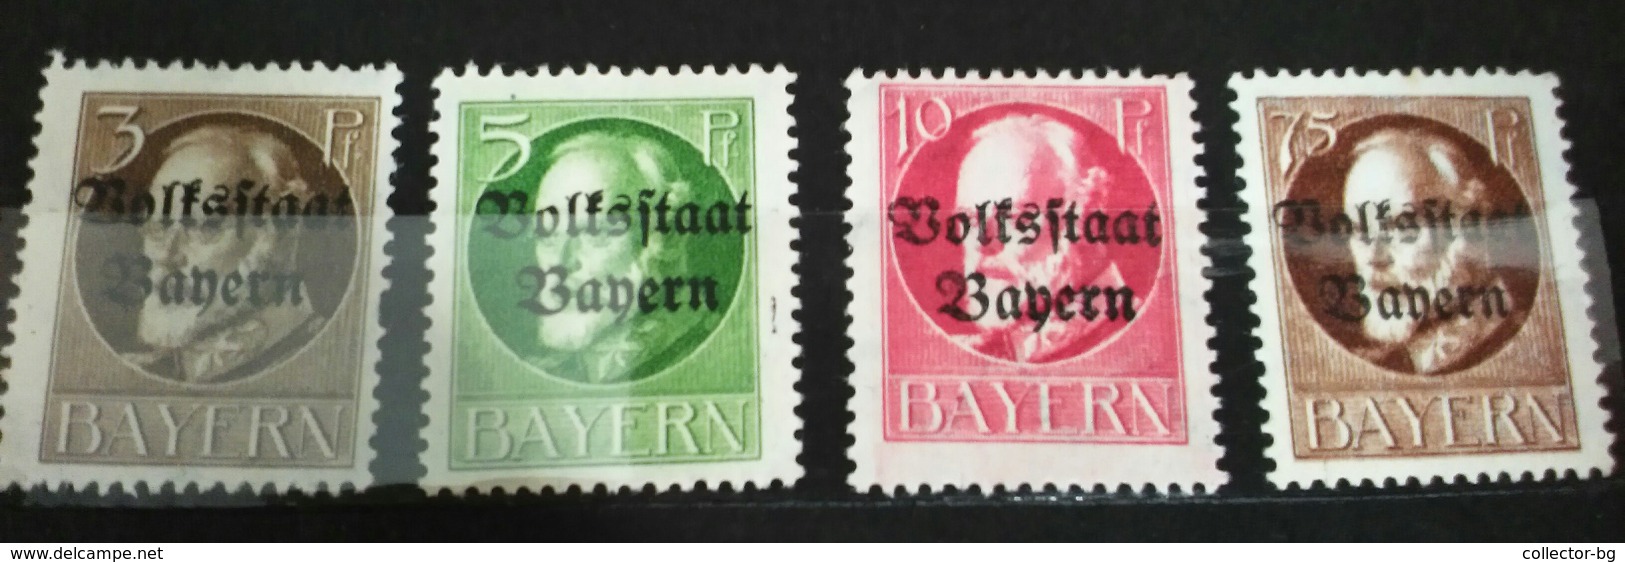 ANTIQUE RARE COLLECTIBLE SET OF BAYERN BAVARIA GERMANY POSTAGE STAMPS